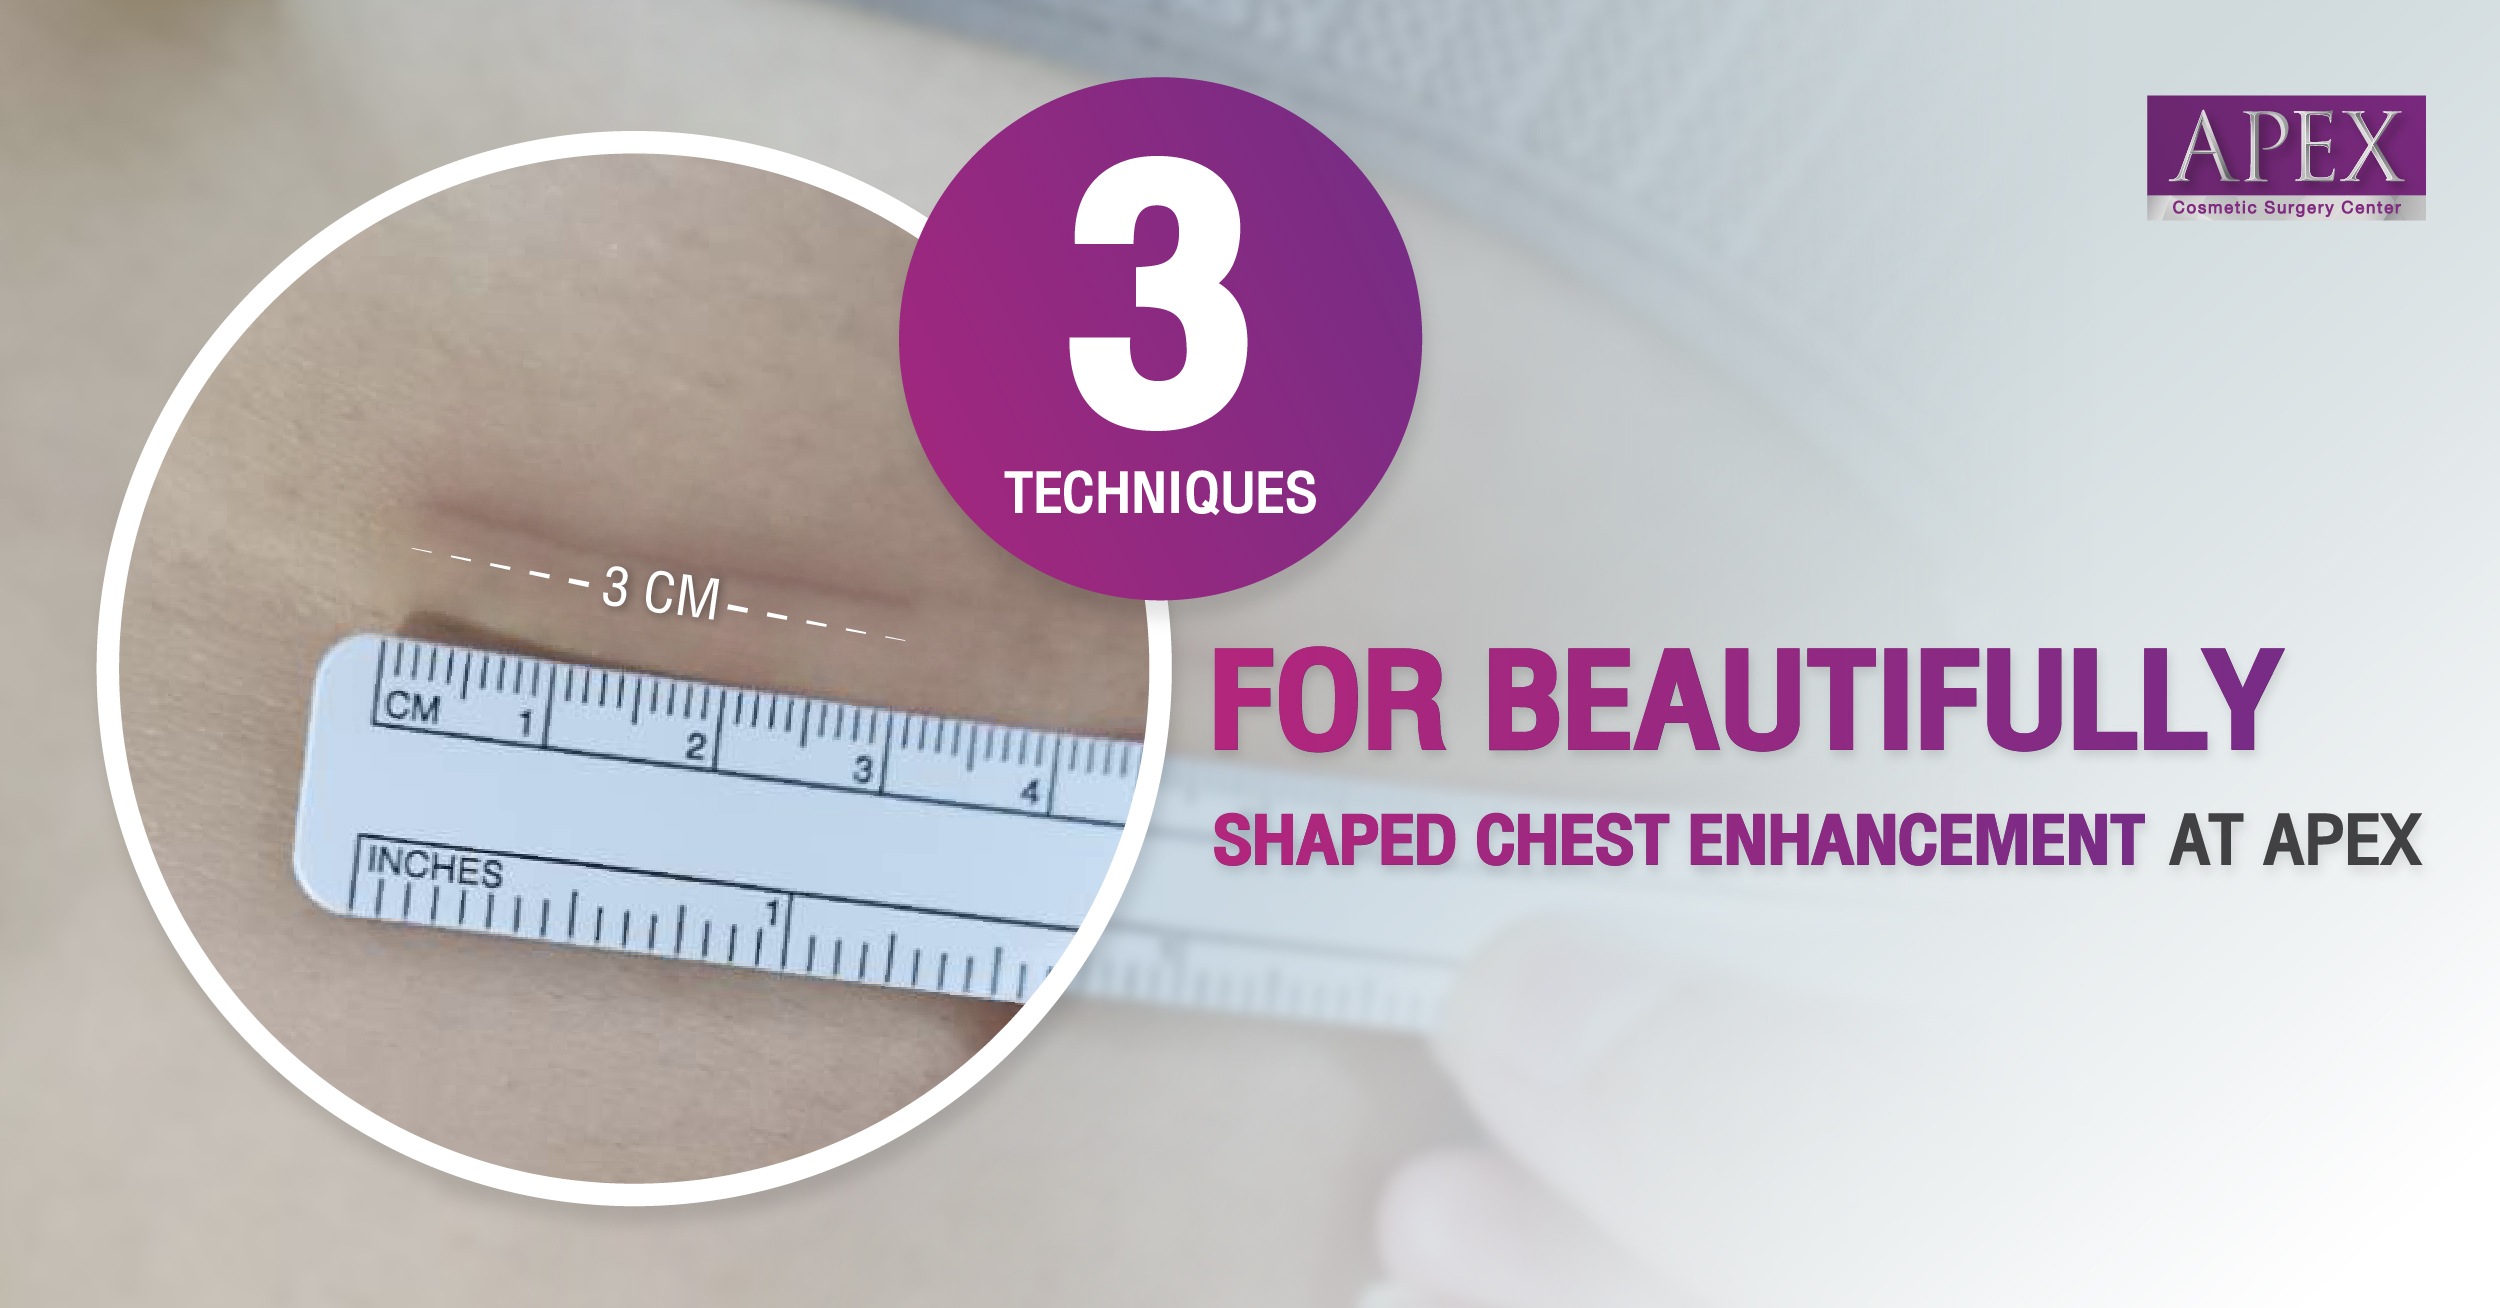 3 Techniques for Beautifully Shaped Chest Enhancement at APEX